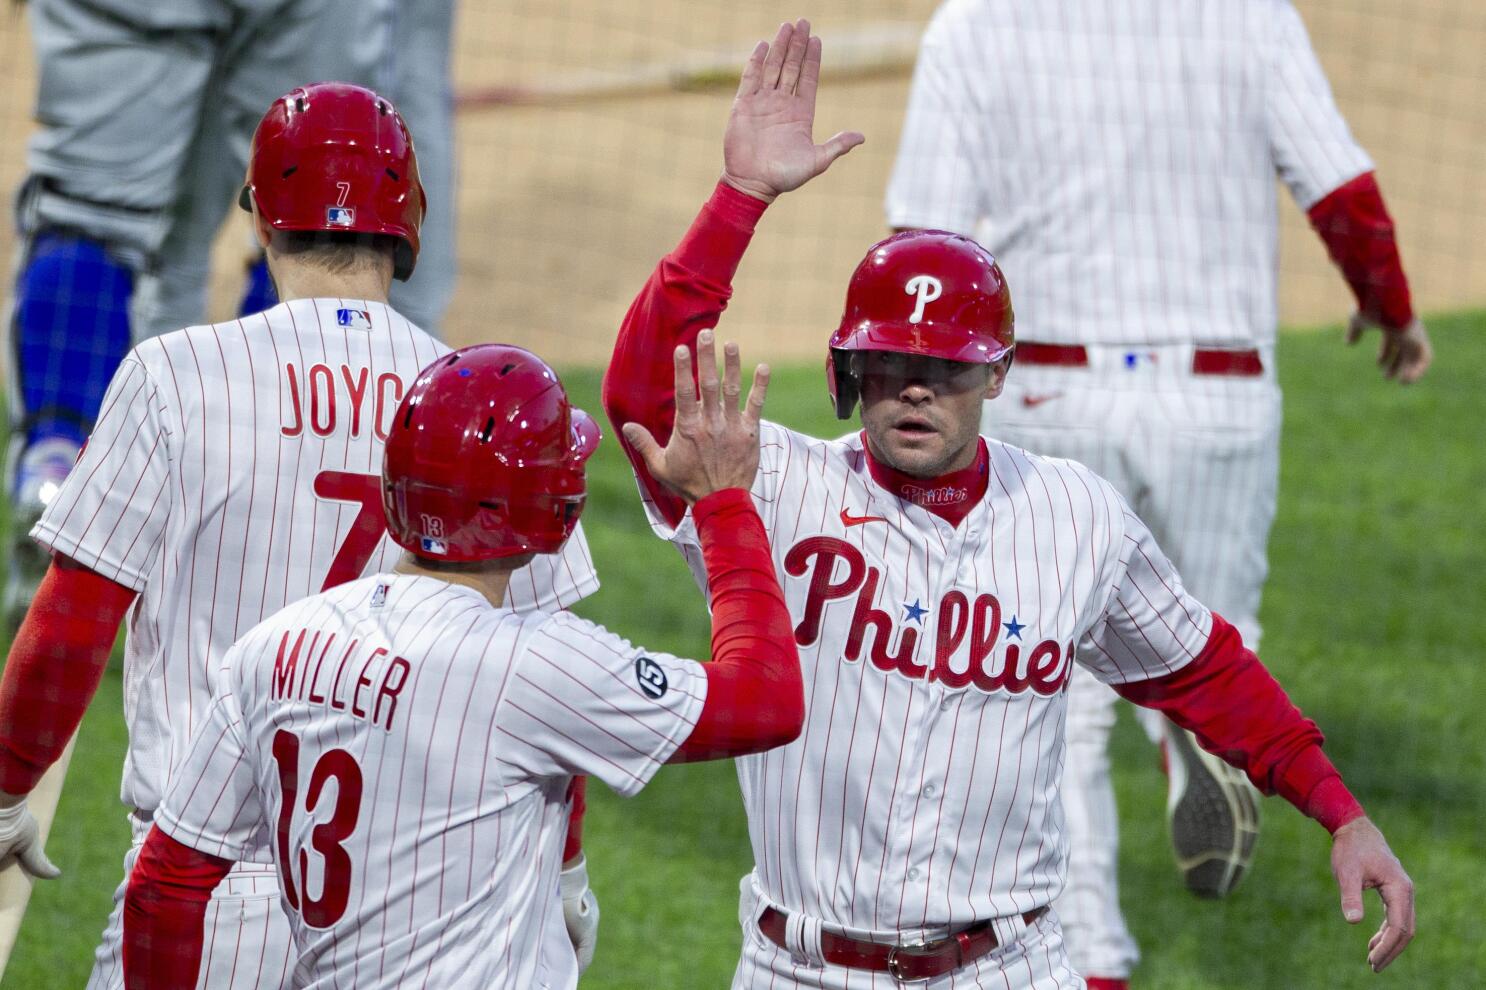 Philadelphia Phillies shortstop Didi Gregorious hit a homer with a backup  helmet and bat